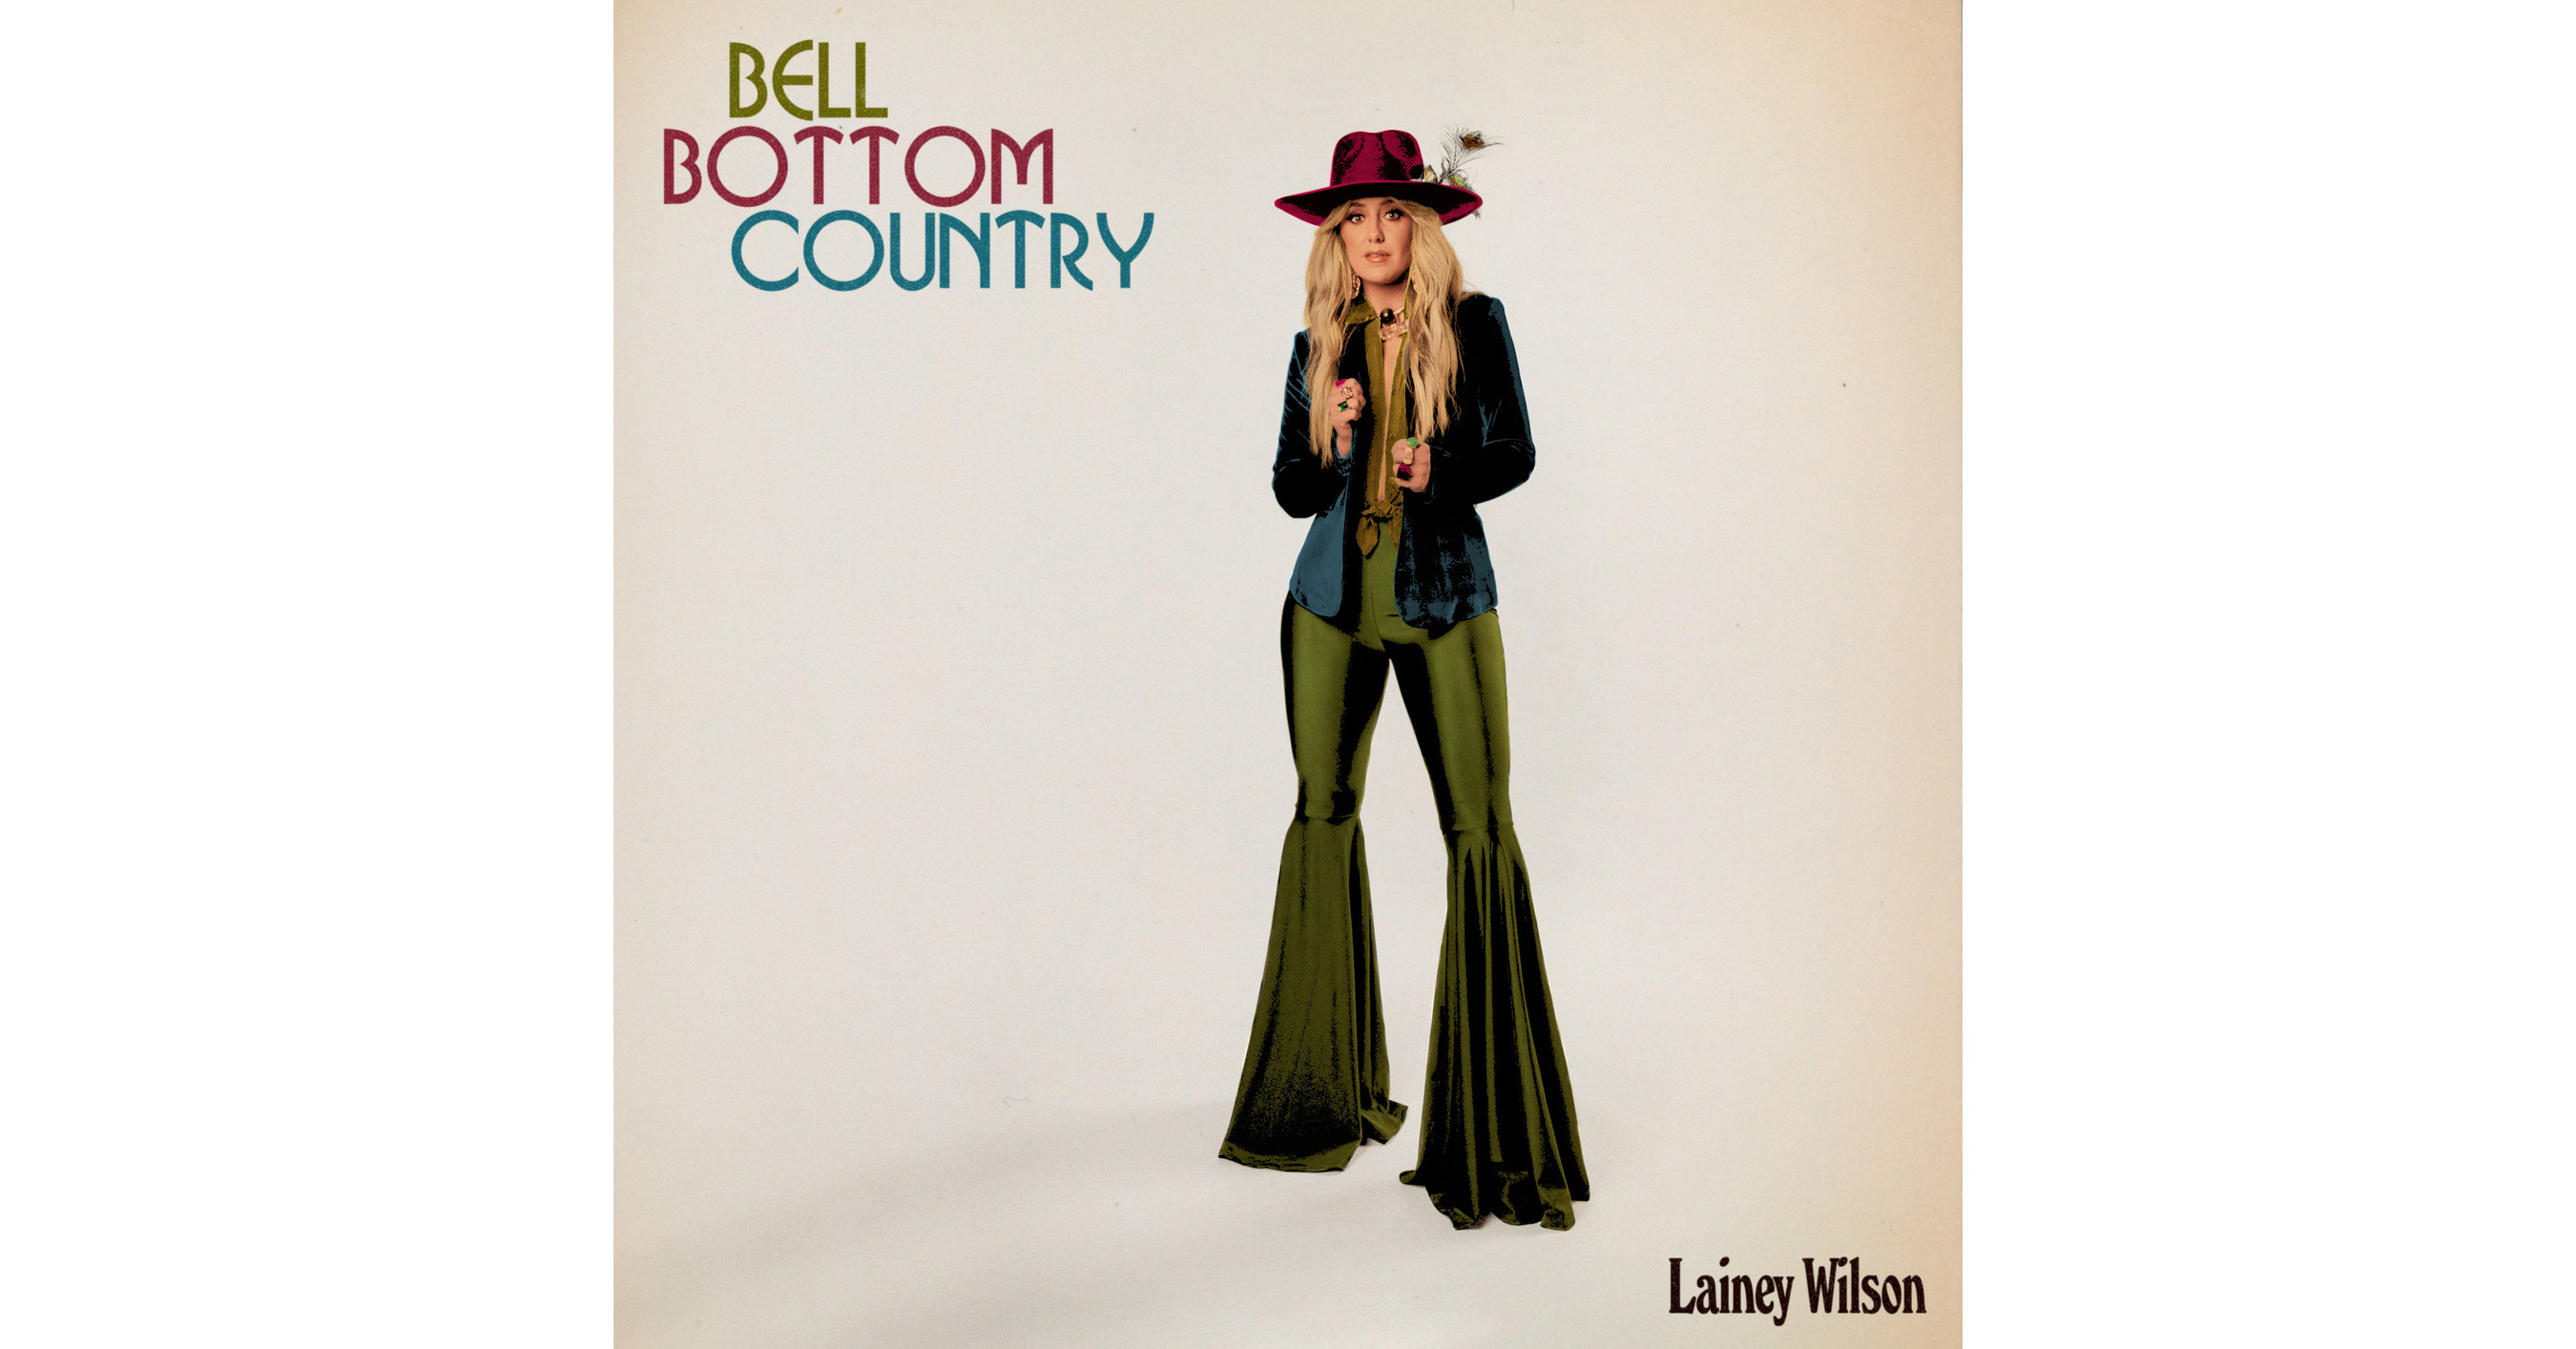 Lainey Wilson's Bell Bottom Country Album Available Now